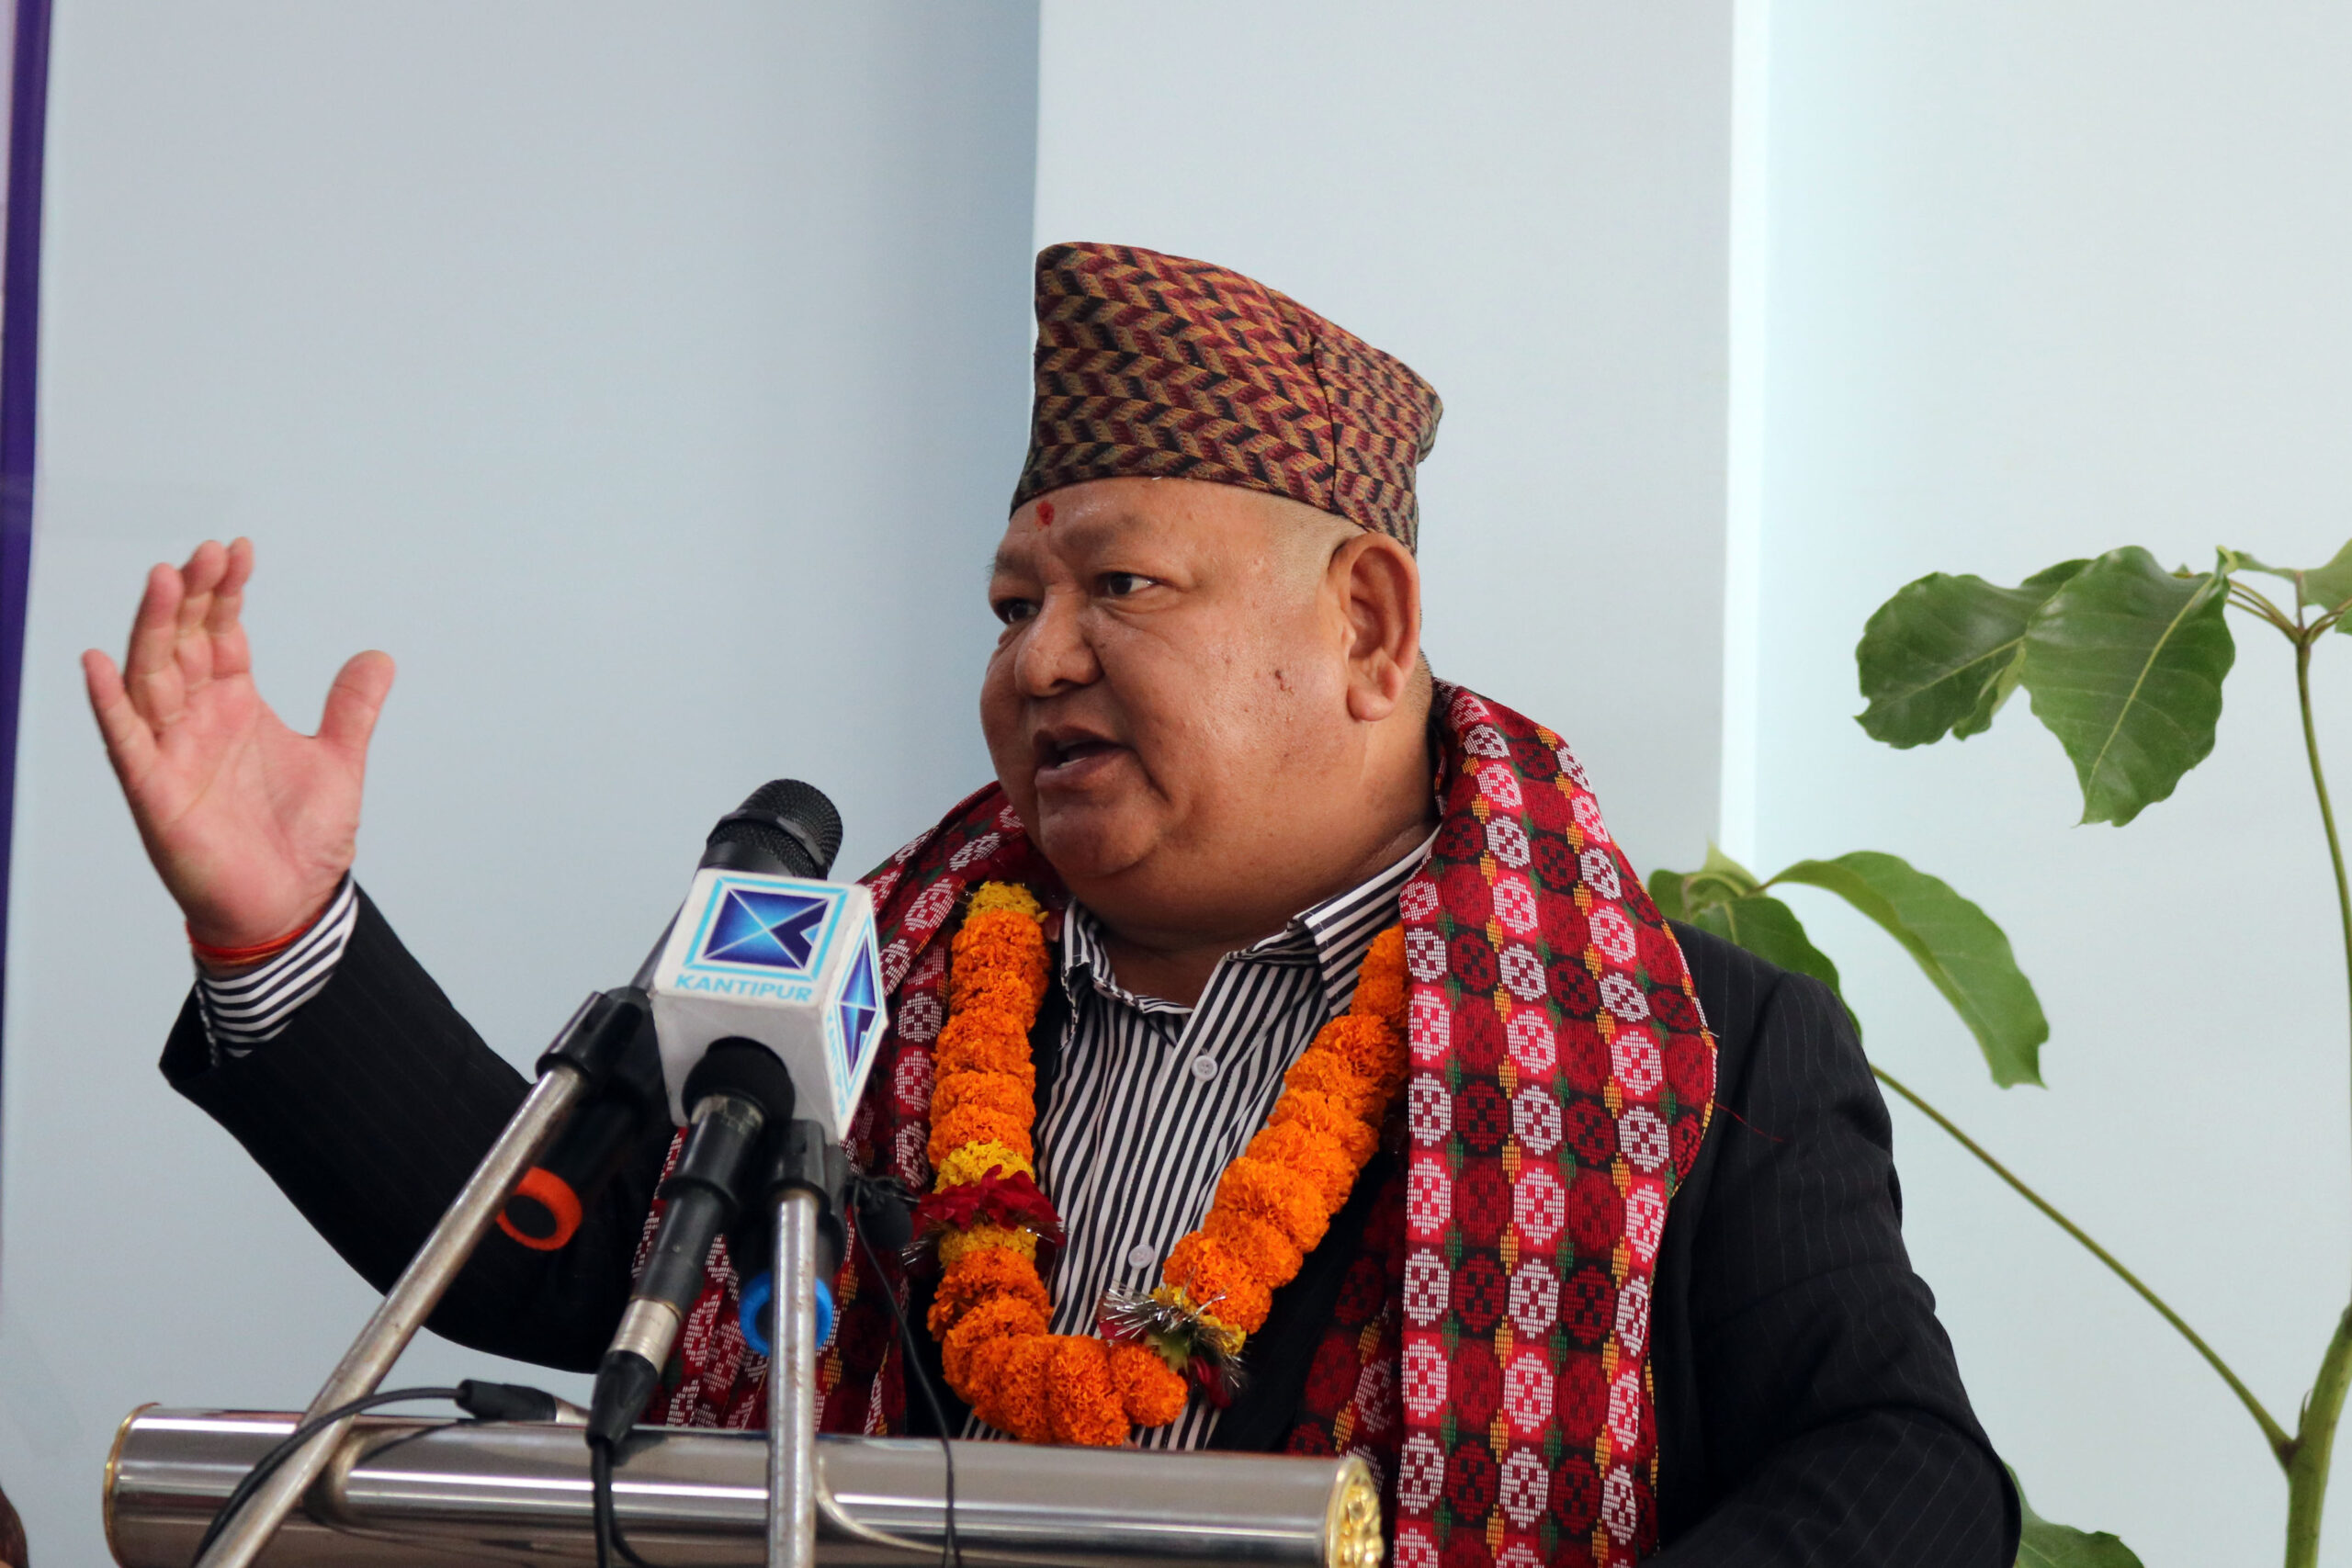 Culture Minister Ale calls for preserving country’s religion, culture